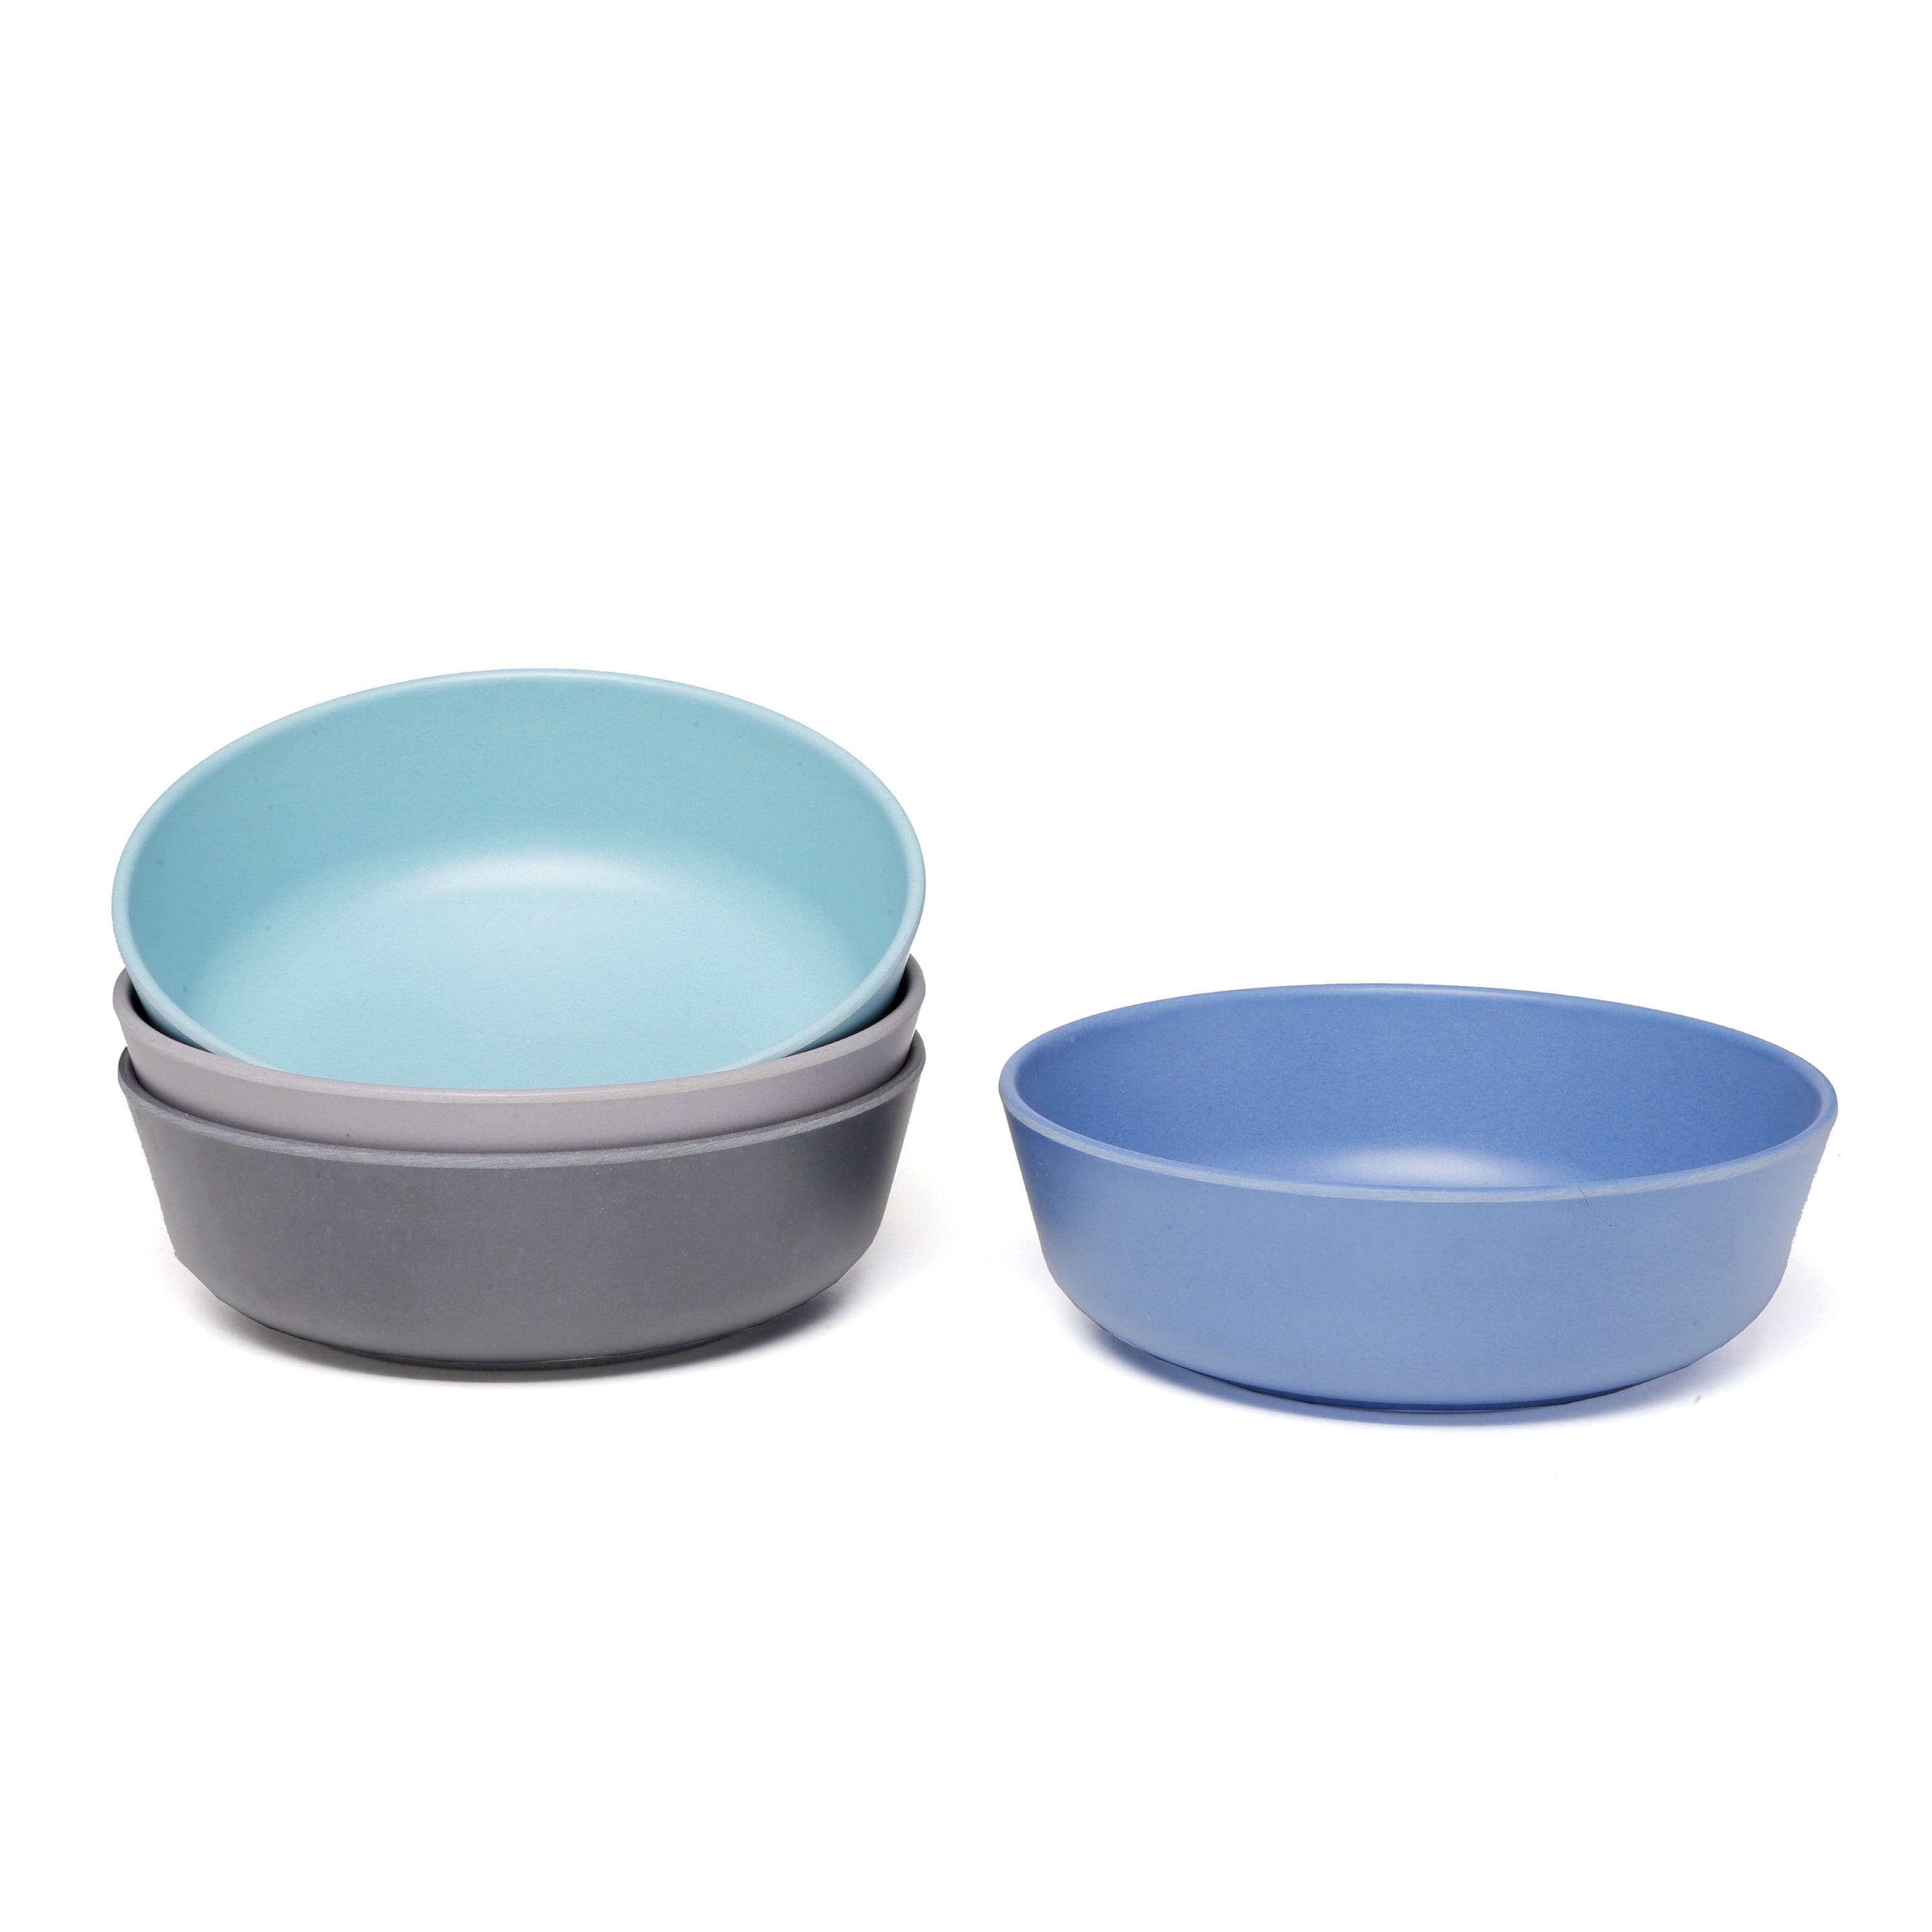 Bamboo Dinnerware Snack Bowls for Kids - Cruise (Blue / Gray